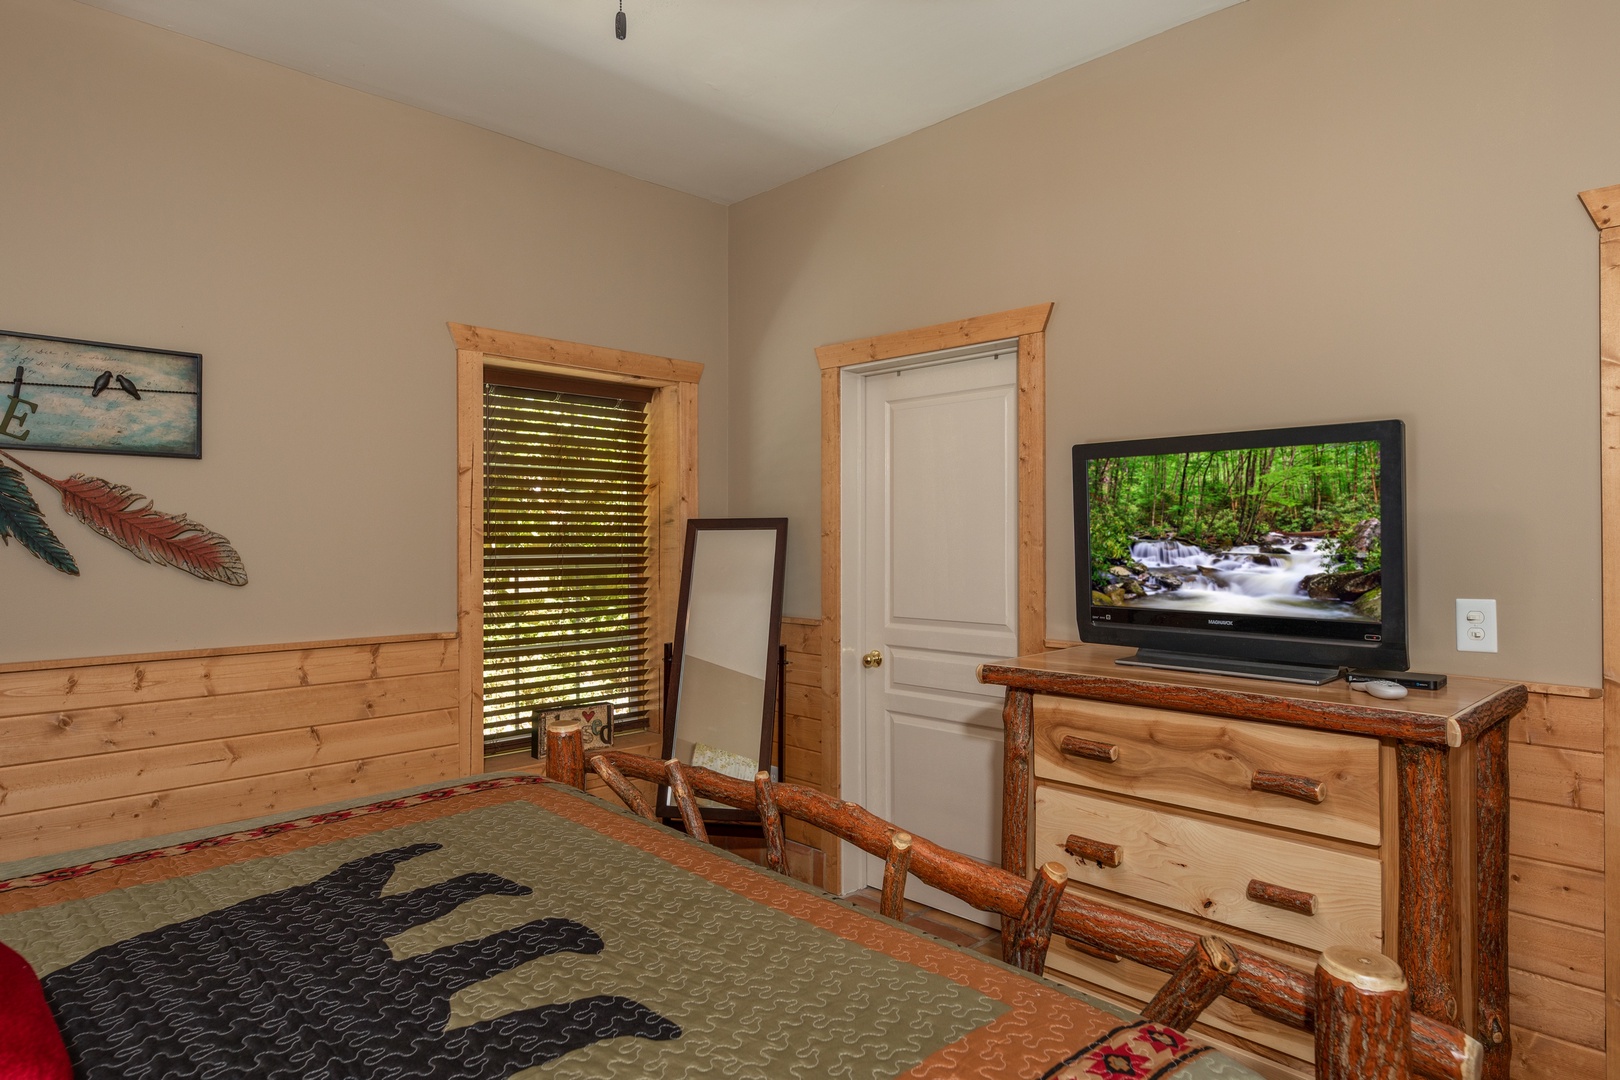 Dresser, mirror, and tv in a bedroom at Hawk's Heart Lodge, a 3 bedroom cabin rental located in Pigeon Forge